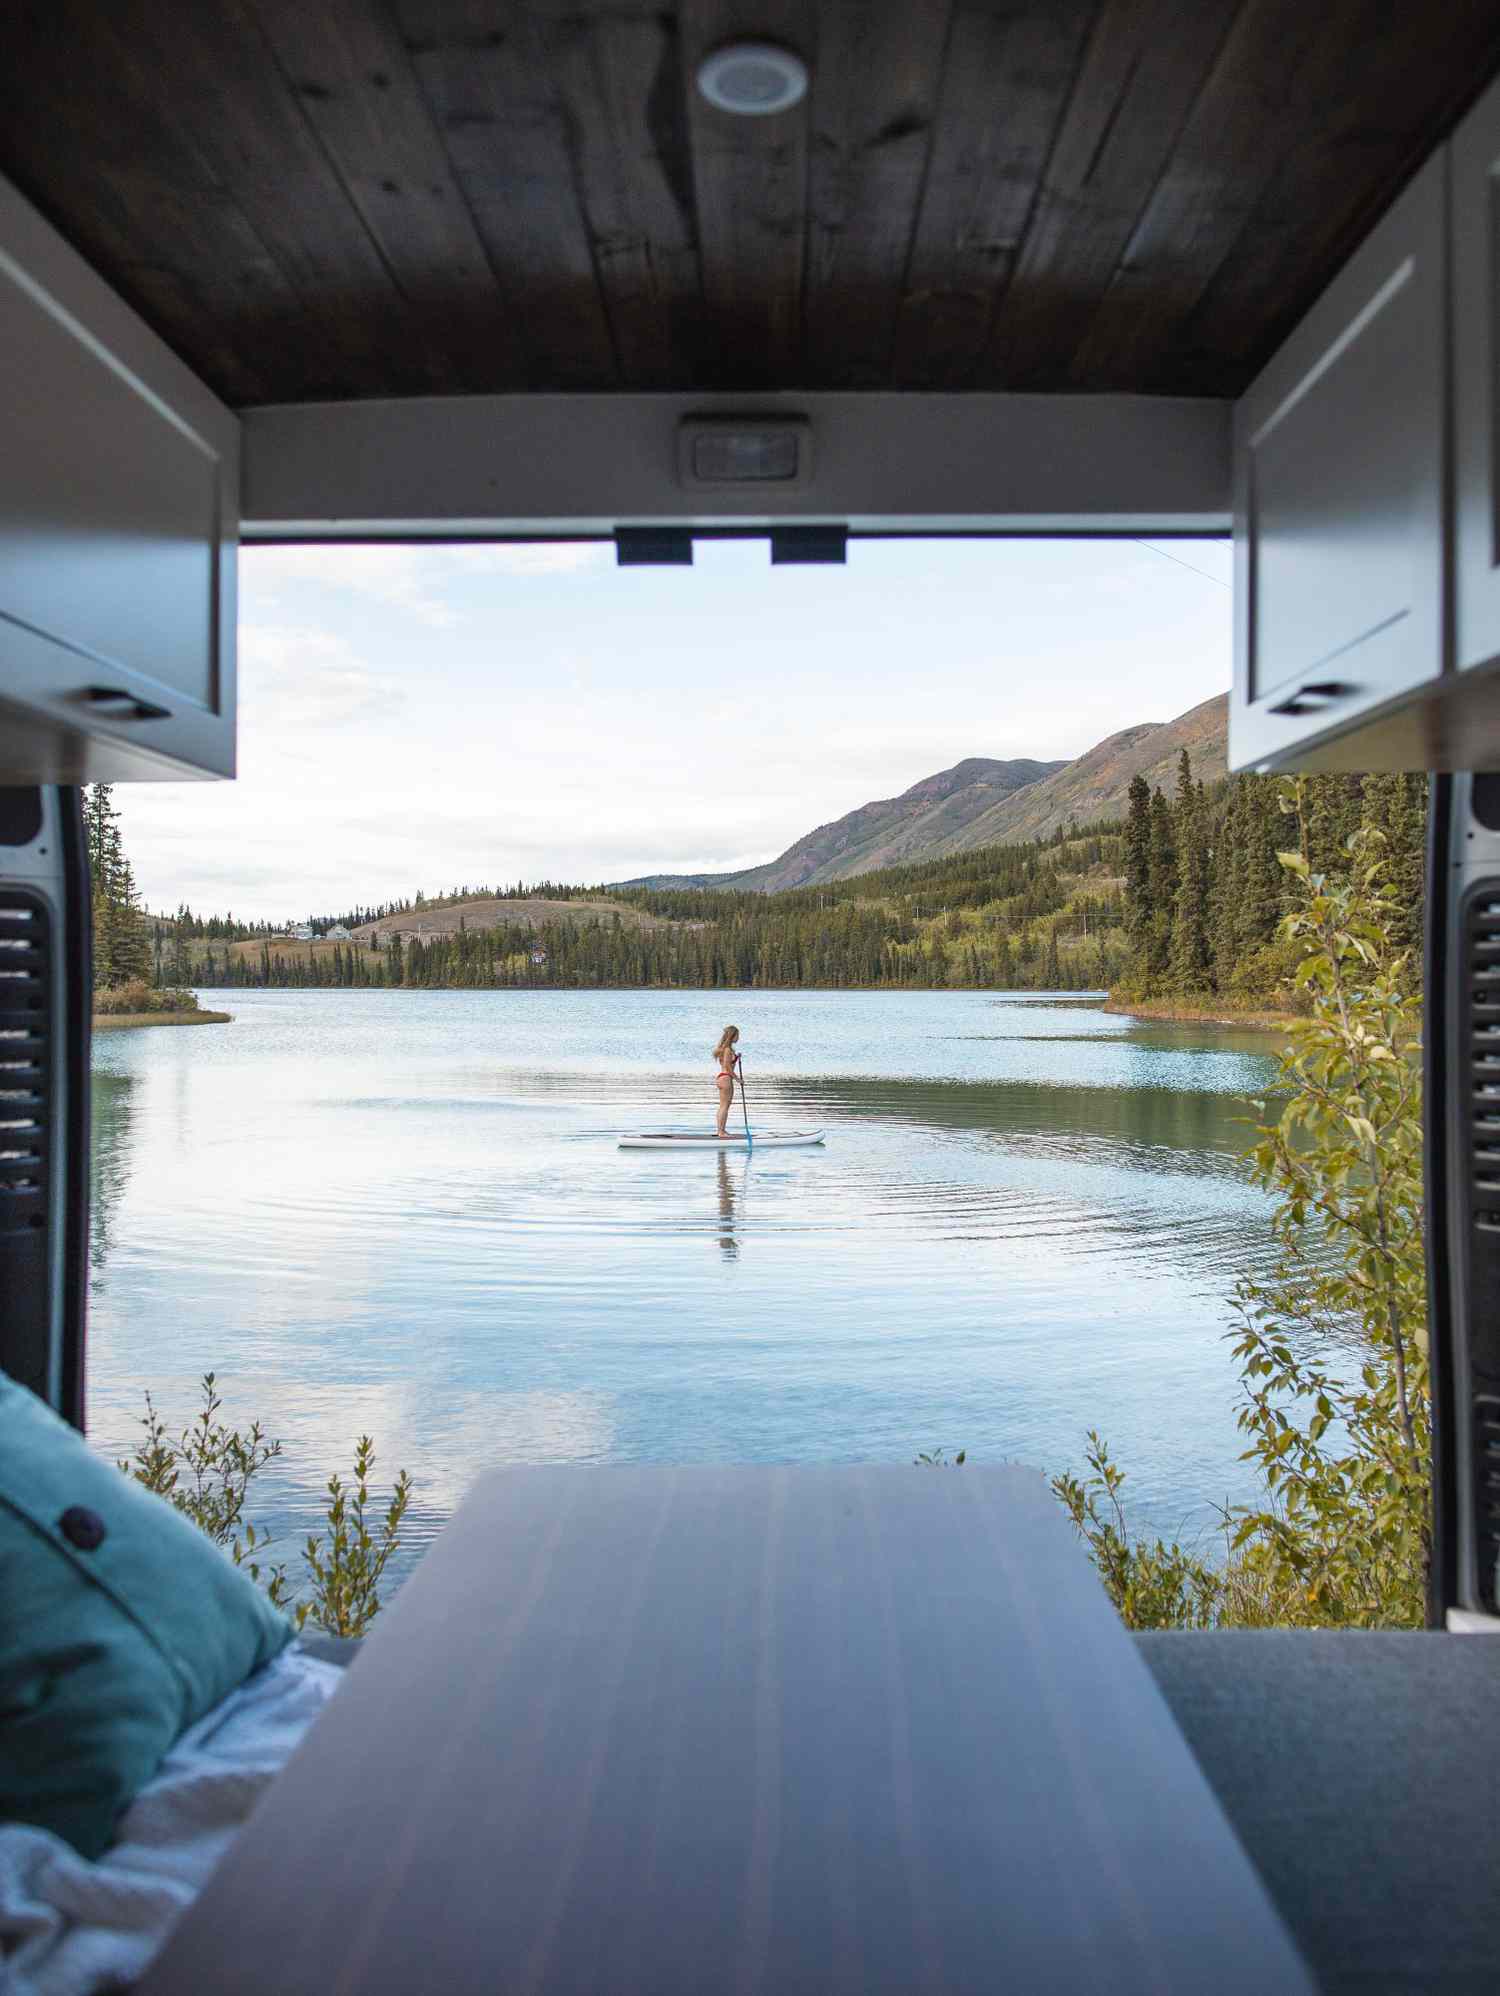 View through RV camper of woman paddleboarding